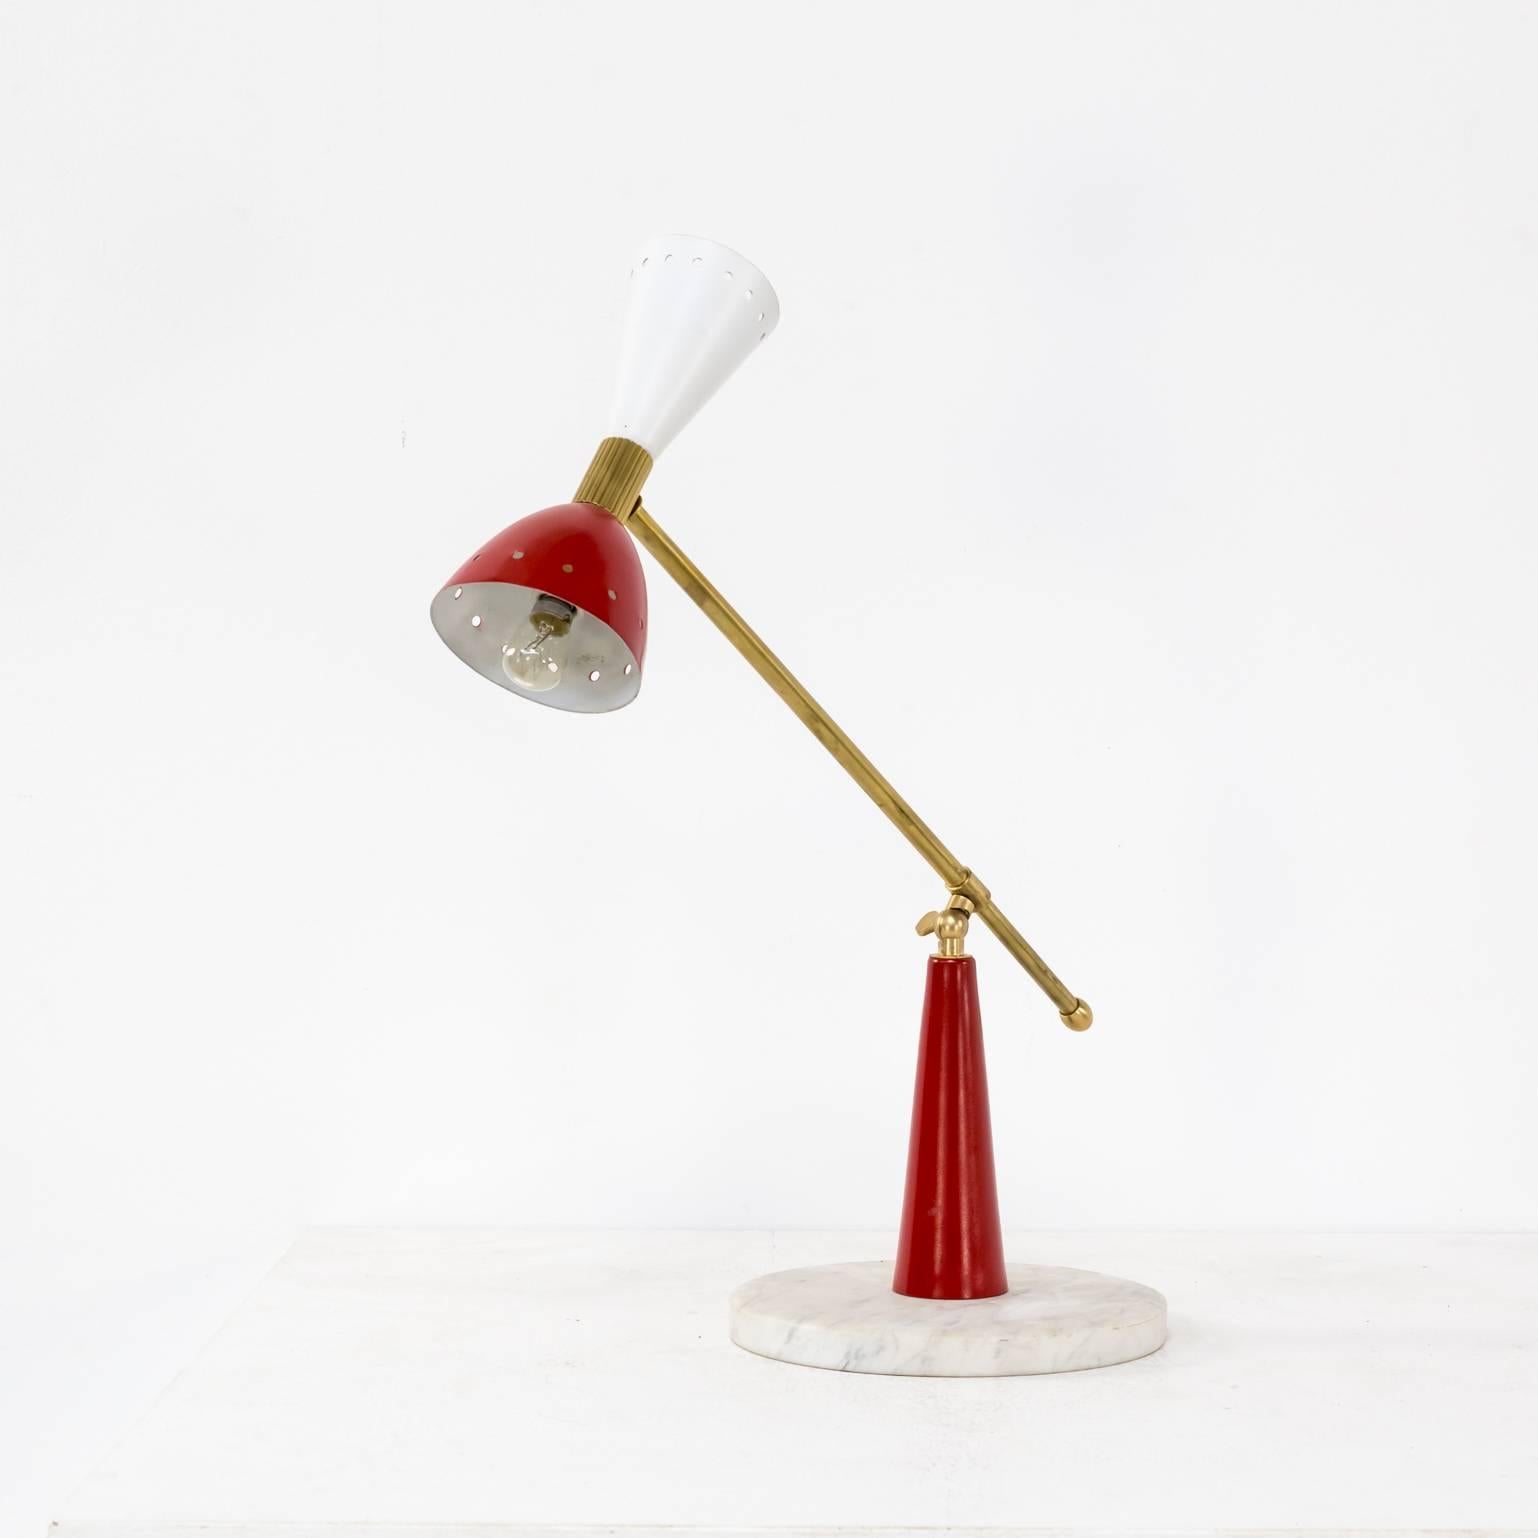 1950s Stilnovo Diabolo table lamp with marble foot. Good and working condition, wear consistent with age and use.